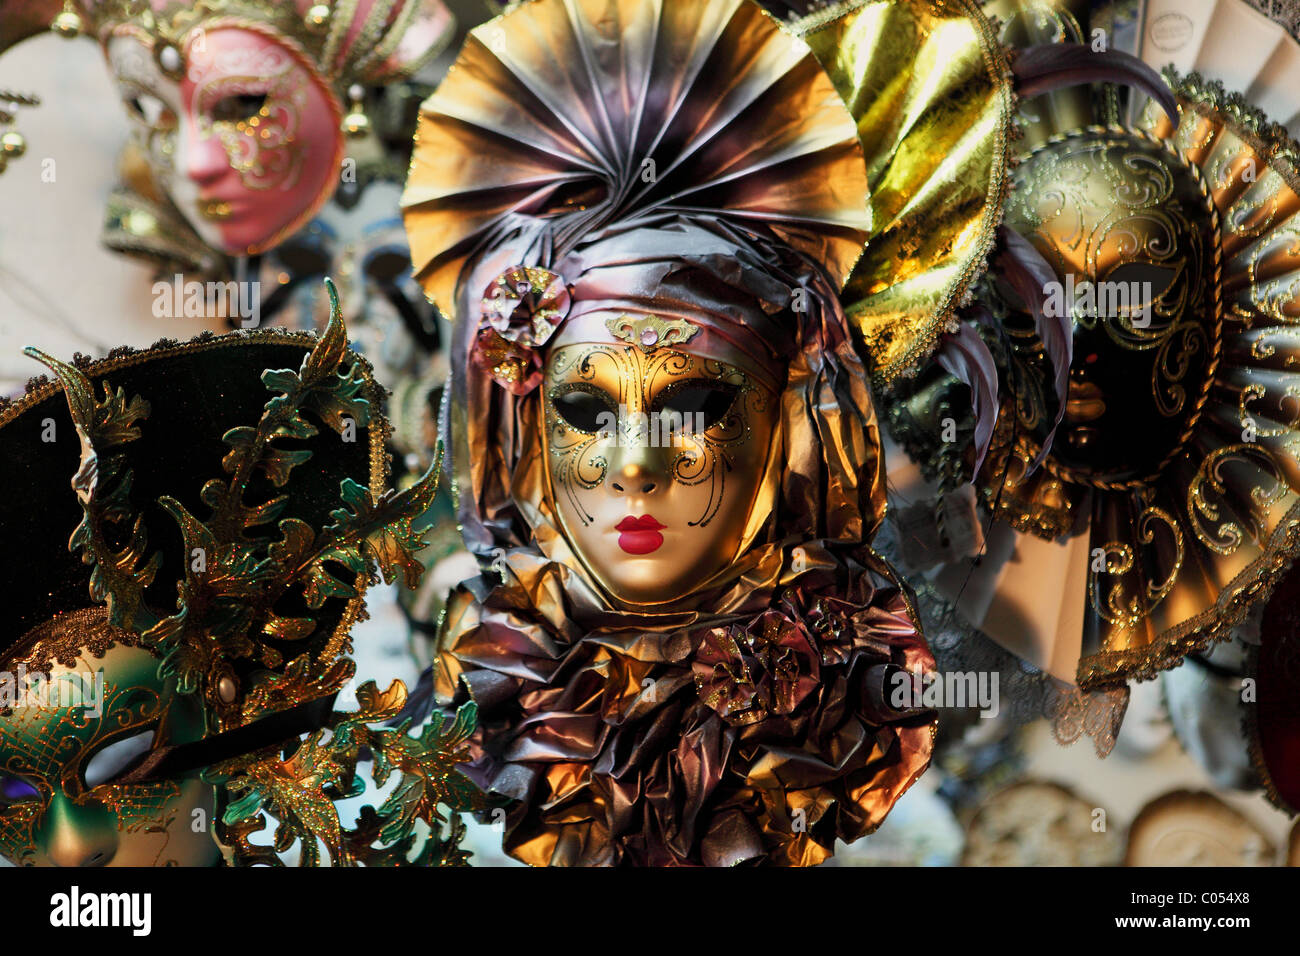 Carnevale masks on sale at a market in Venice, Italy. The masks are popular tourist souvenirs. Stock Photo